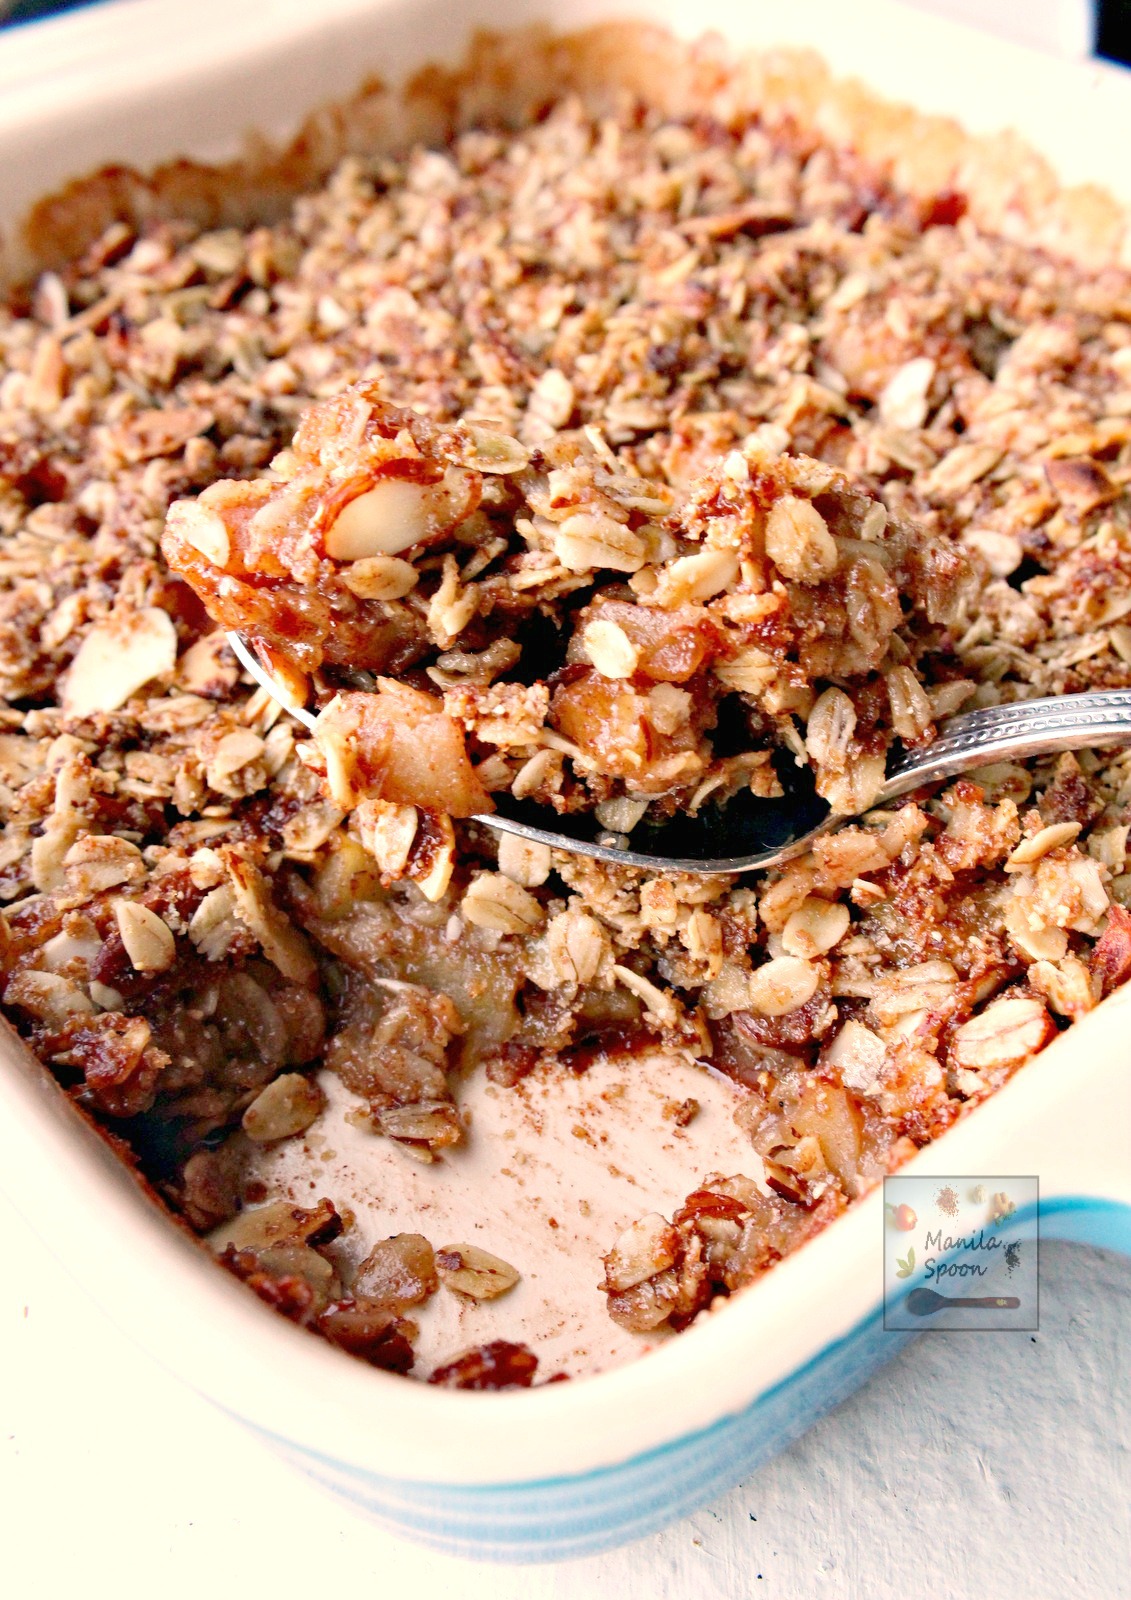 Sweet, fruity with a hint of lemony tang and perfectly spiced with cinnamon and nutmeg this Apple Crisp is simply the best! Completely gluten-free, too.